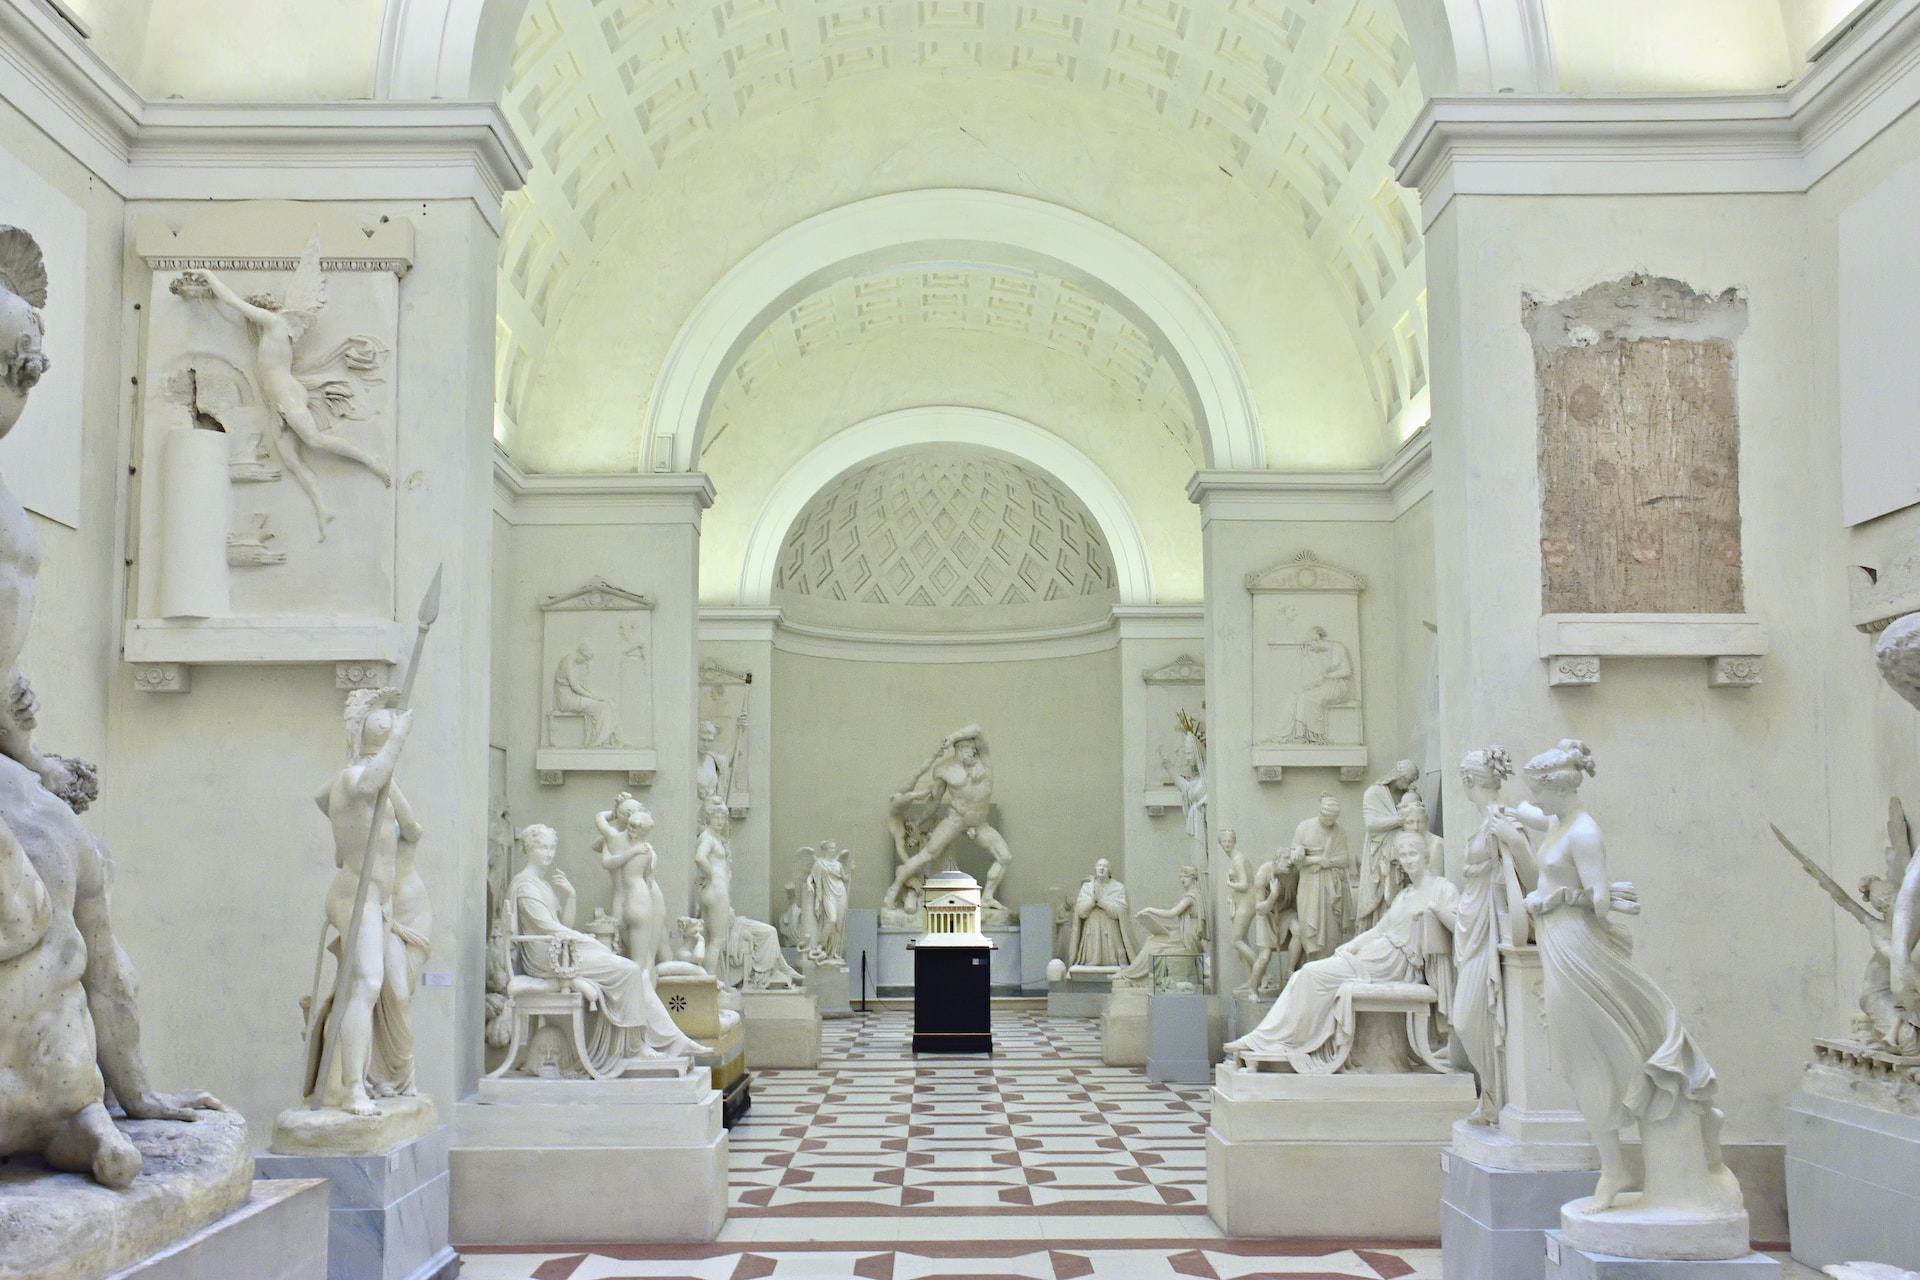 travel to Italy to see the art museums